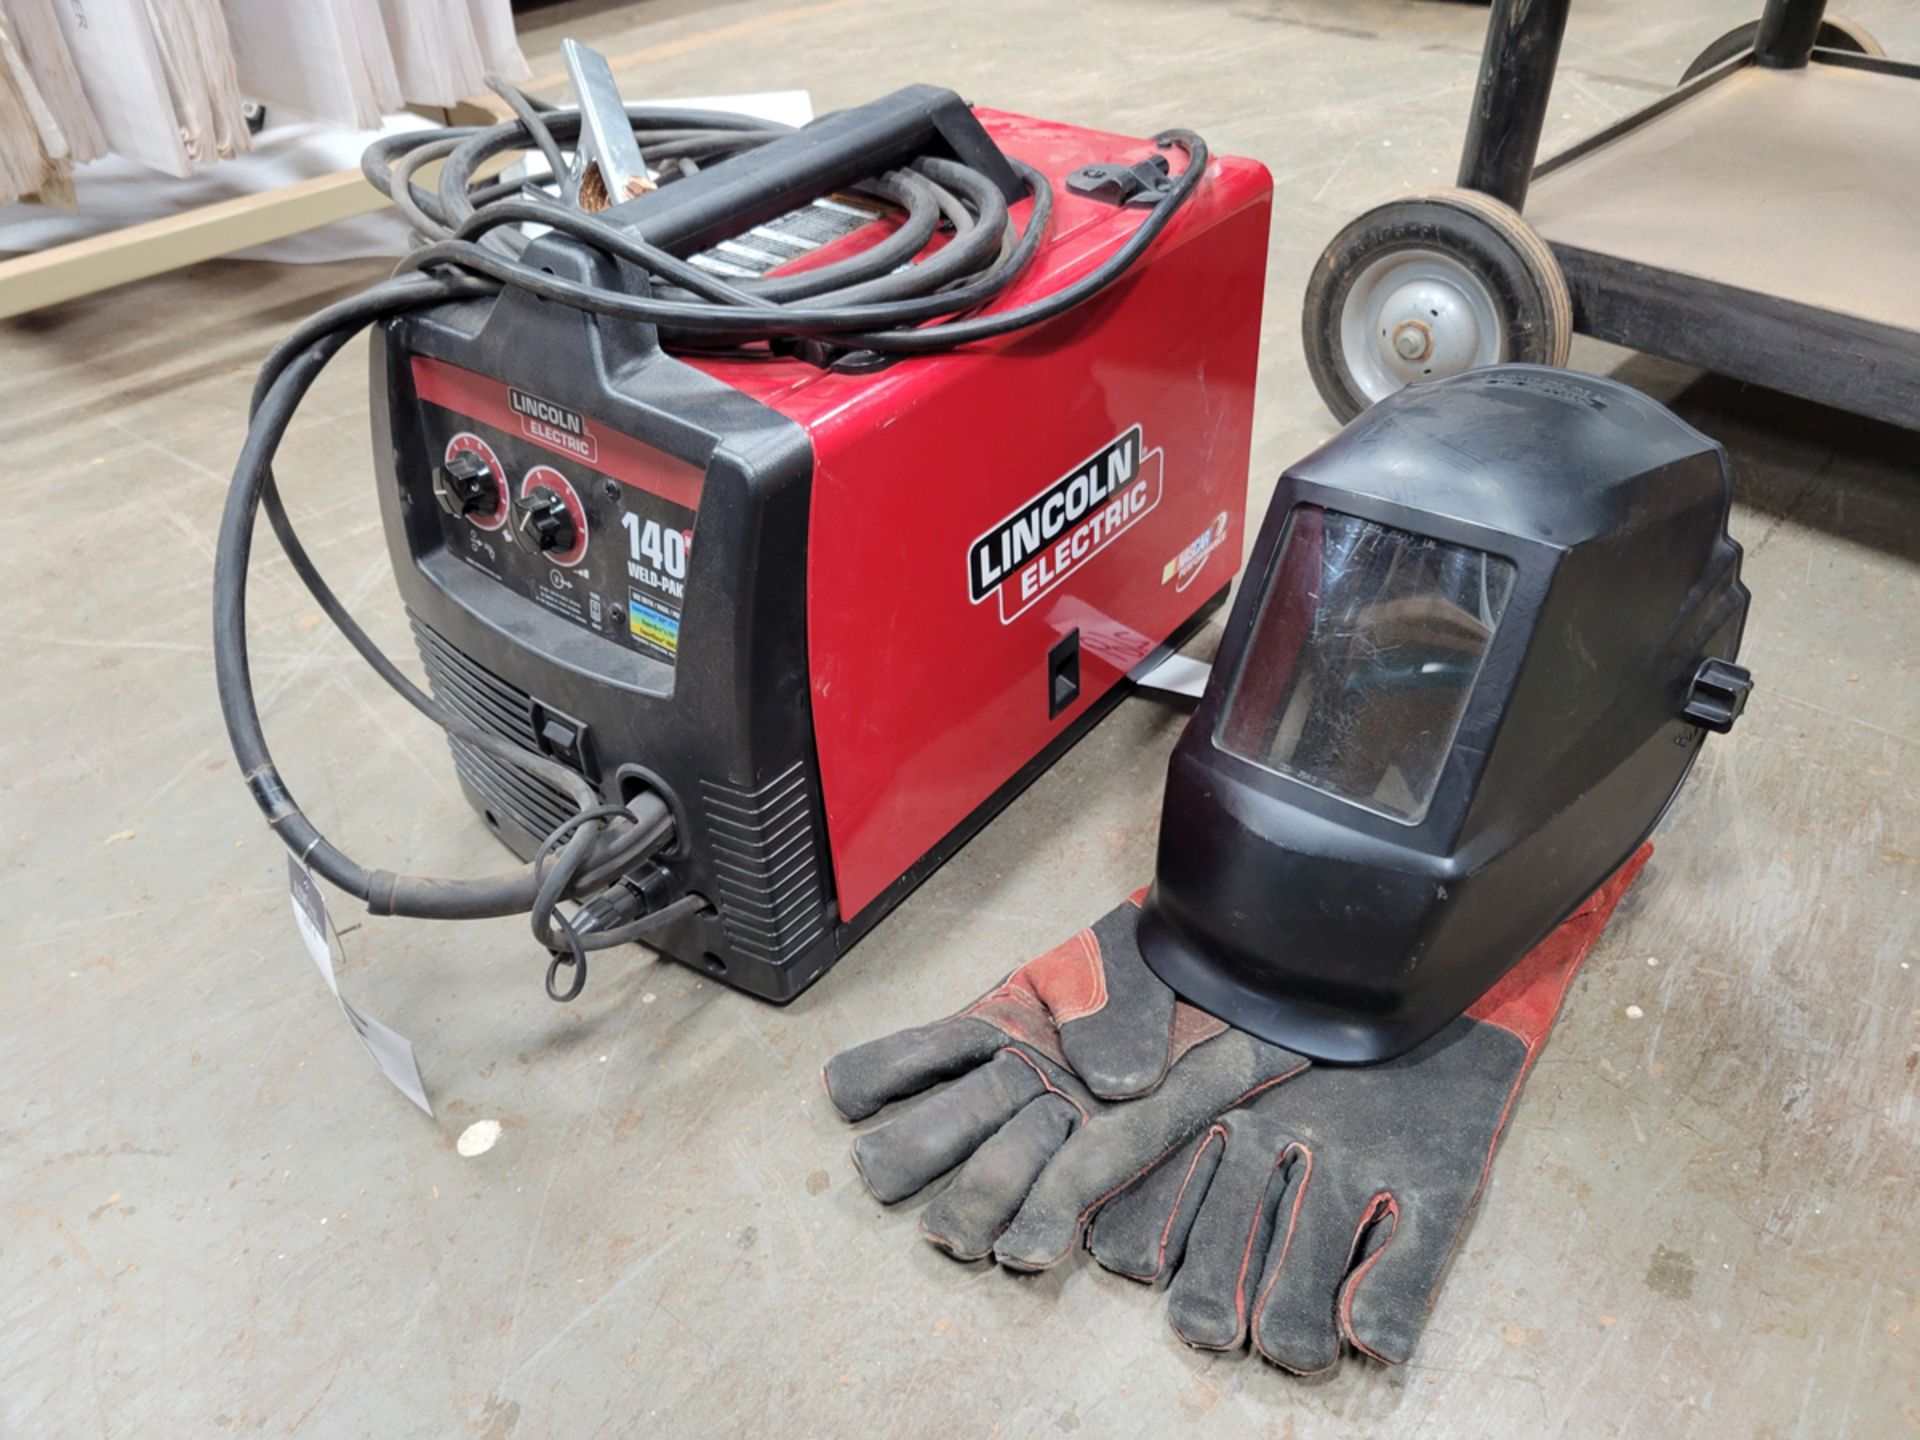 Lincoln Electric Weld Pak 140 HD Mig/ Wire Feed Welder w/ Mask and Gloves